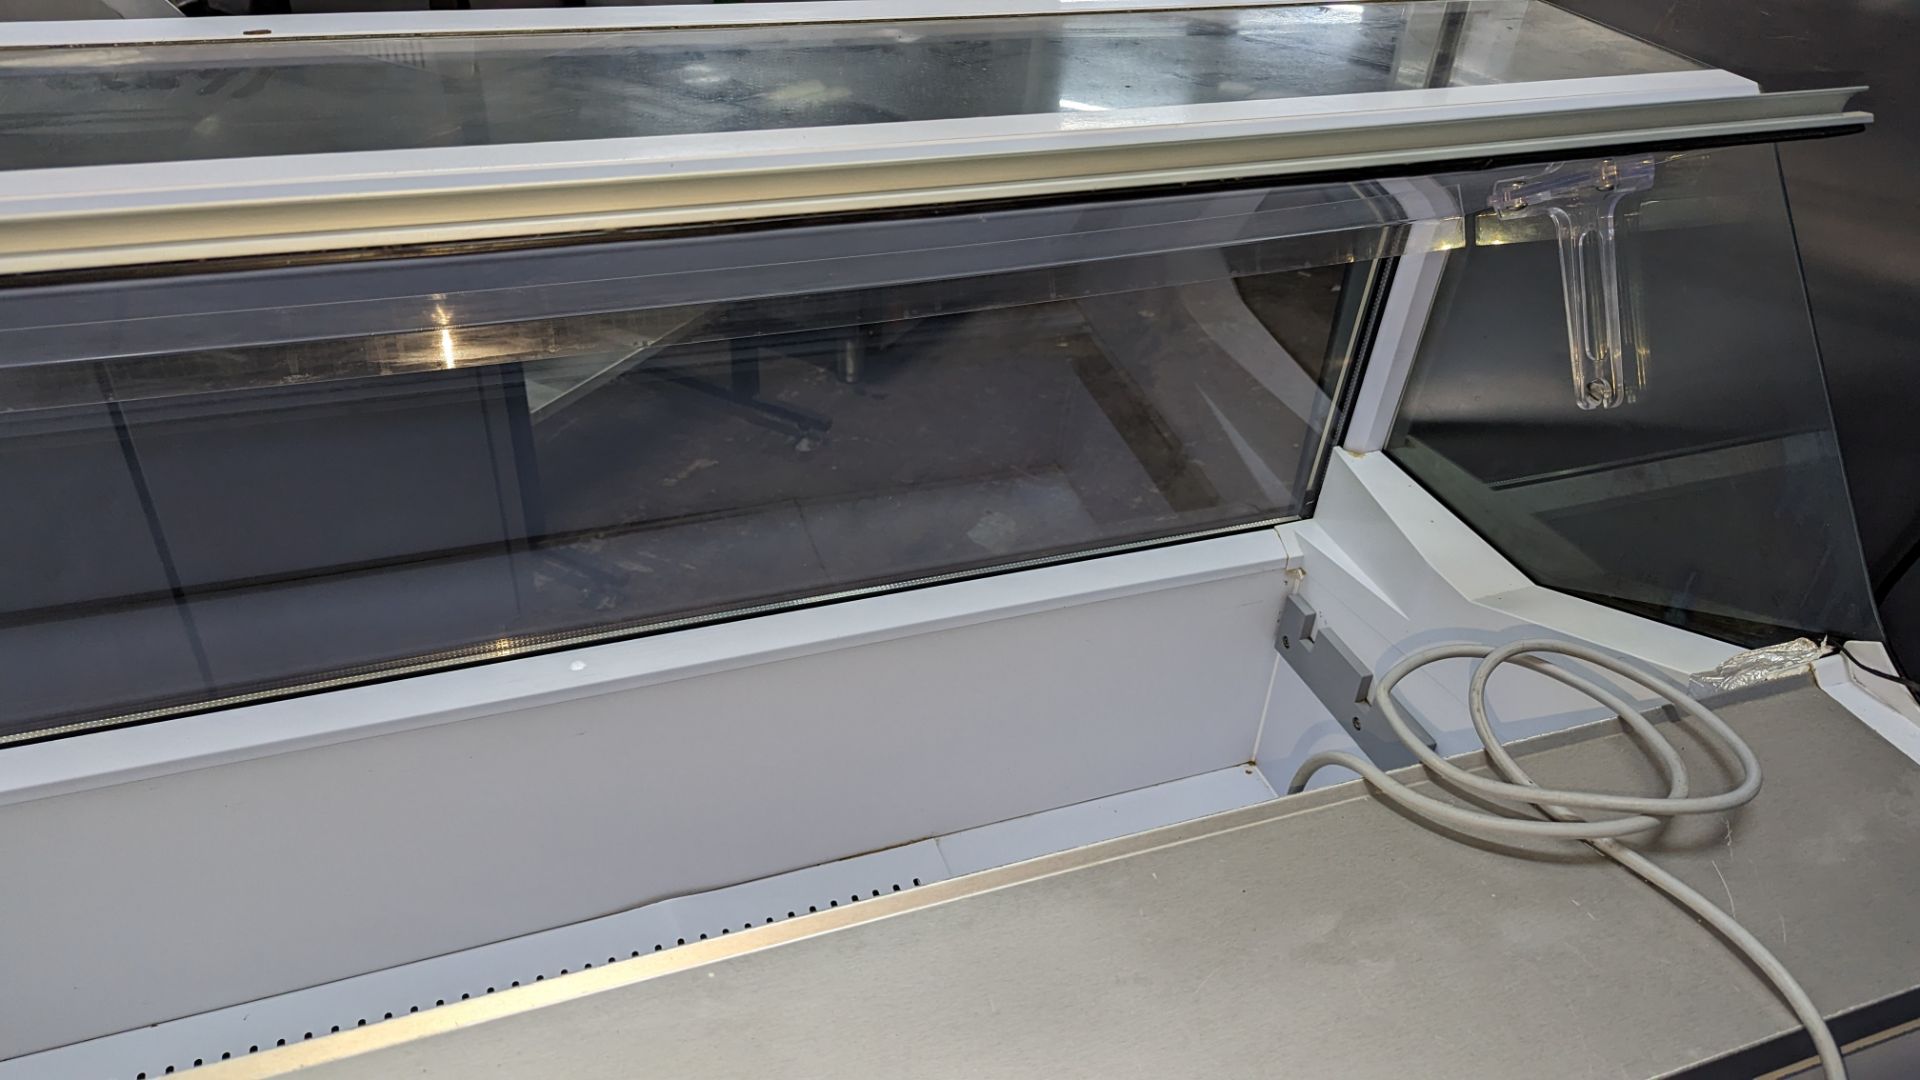 Refrigerated mobile ice cream counter, approximately 166cm wide - Image 6 of 9